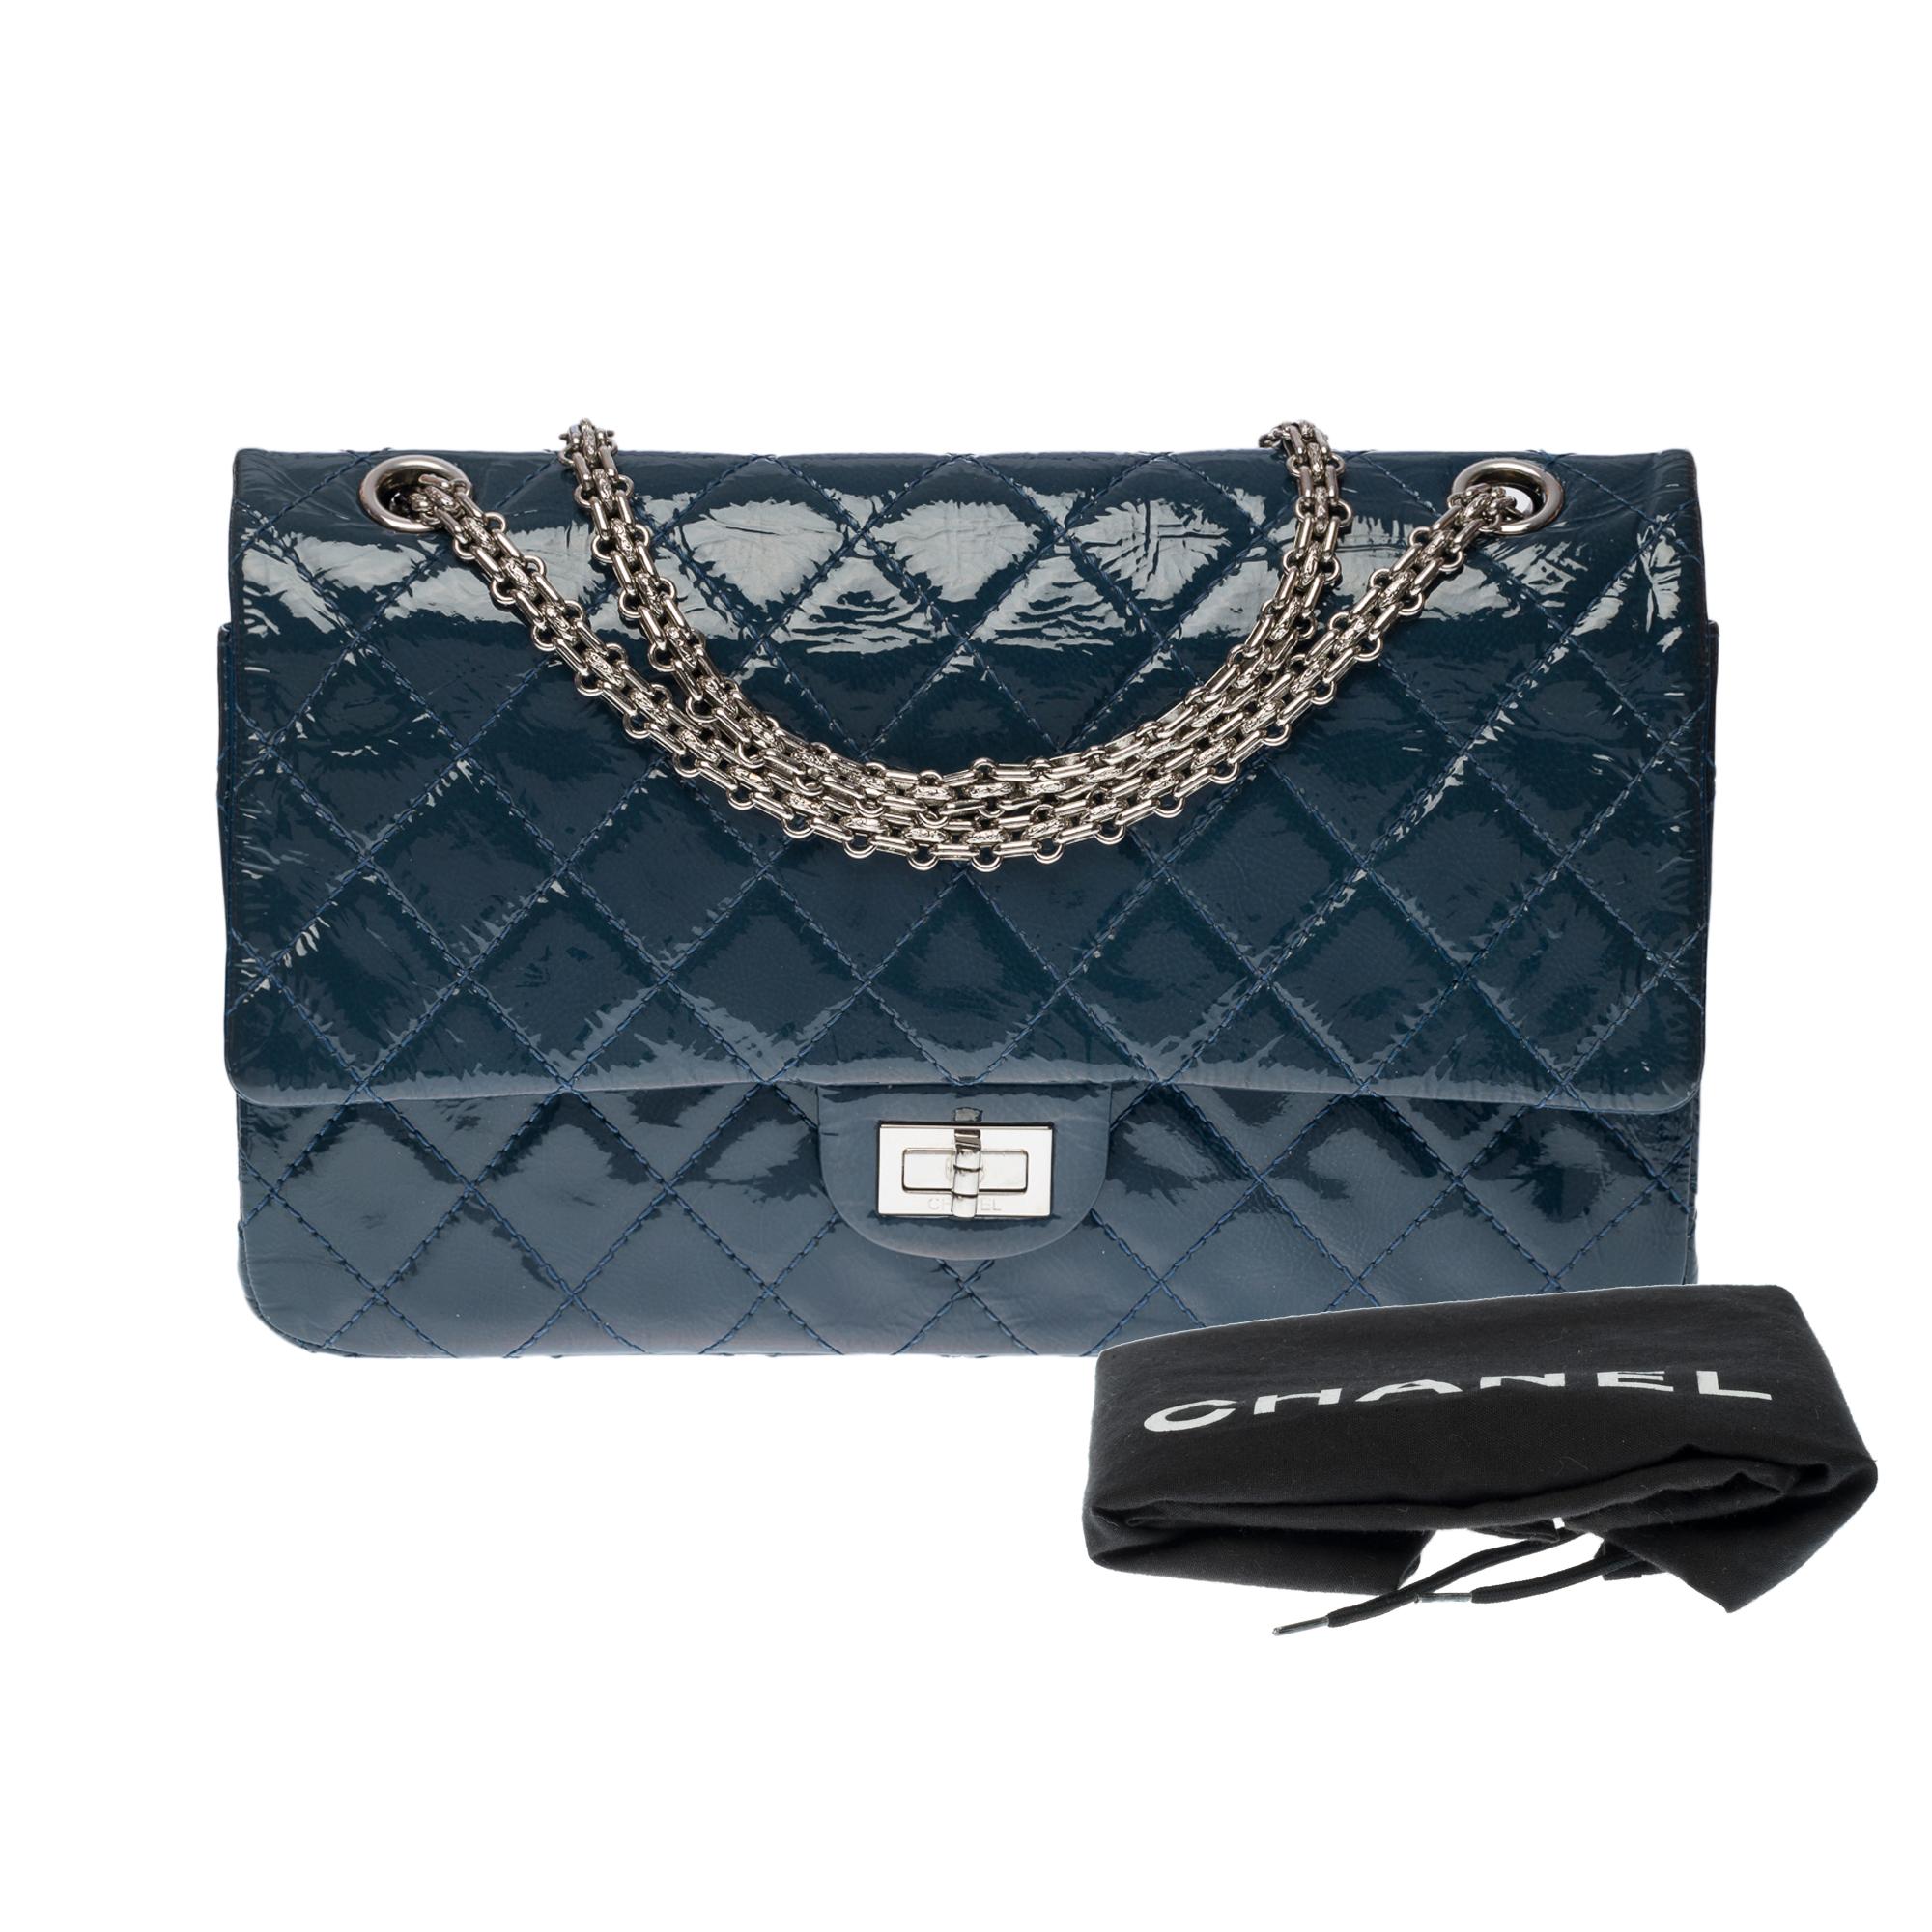 Chanel Classic 2.55 double flap shoulder bag in blue quilted patent leather, SHW 4